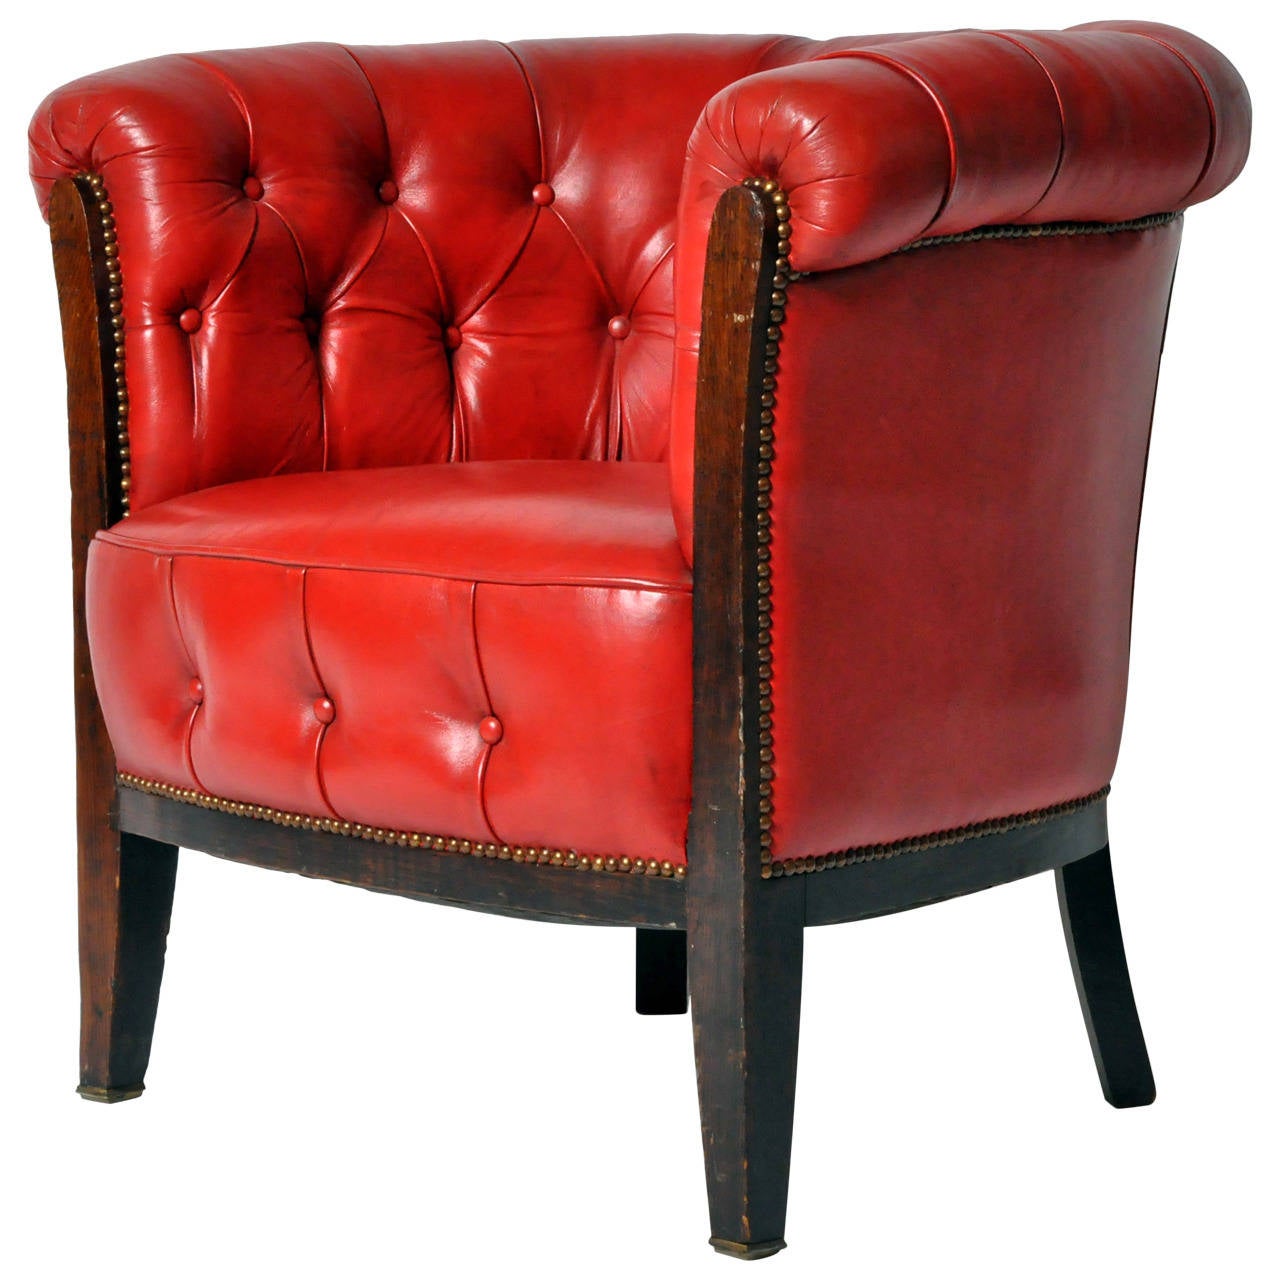 Vintage Tufted Red Leather Chair at 1stdibs